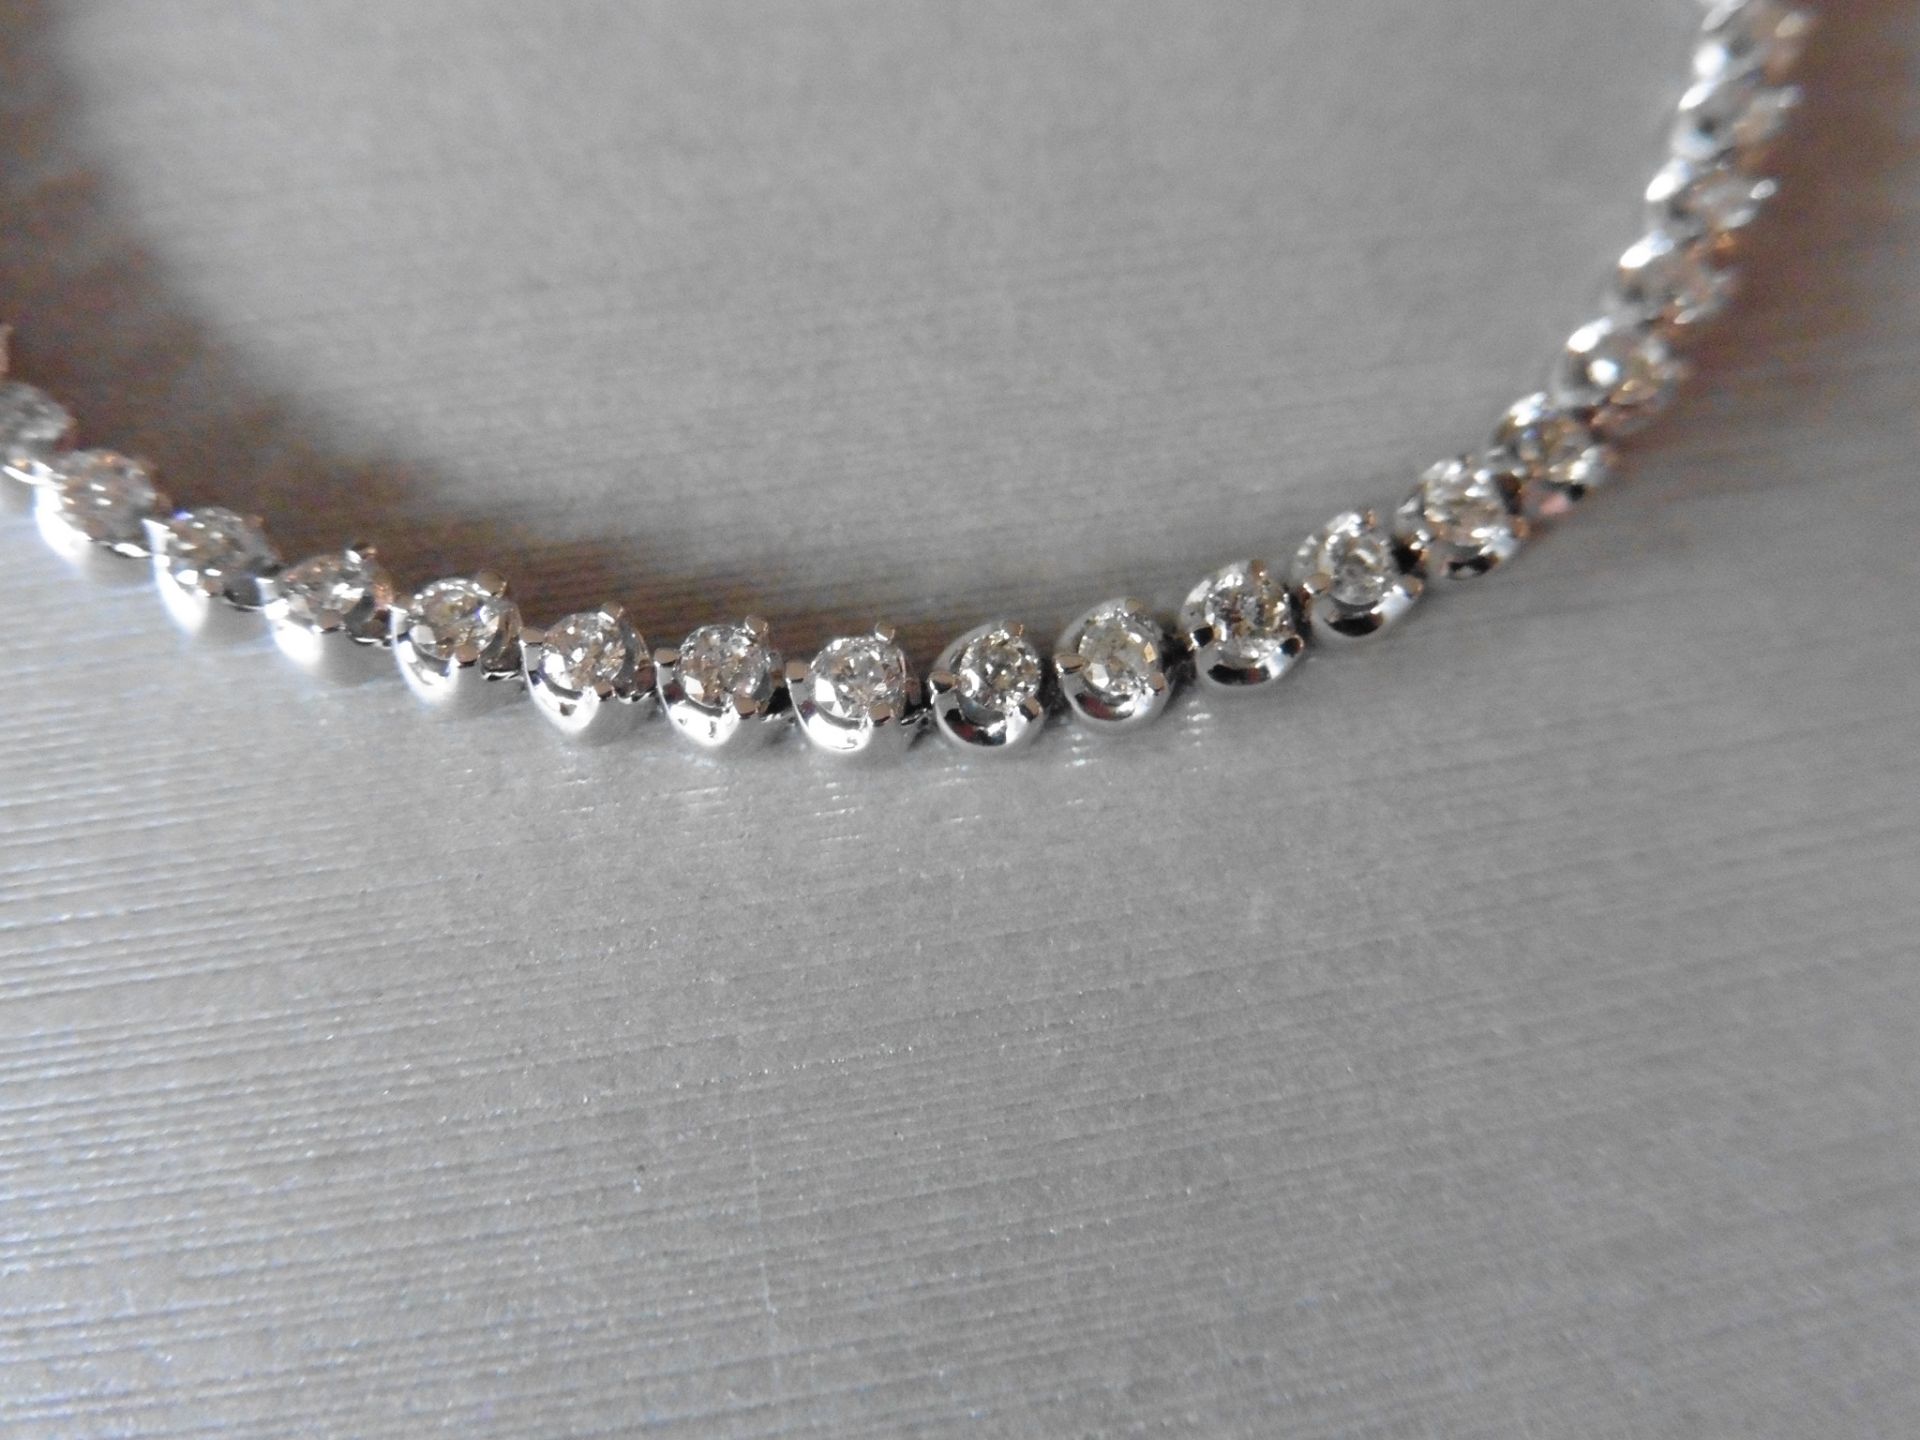 3.75ct diamond tennis bracelet with 54 brilliant cut diamonds, I colour and Si2 clarity, weighing - Image 2 of 3